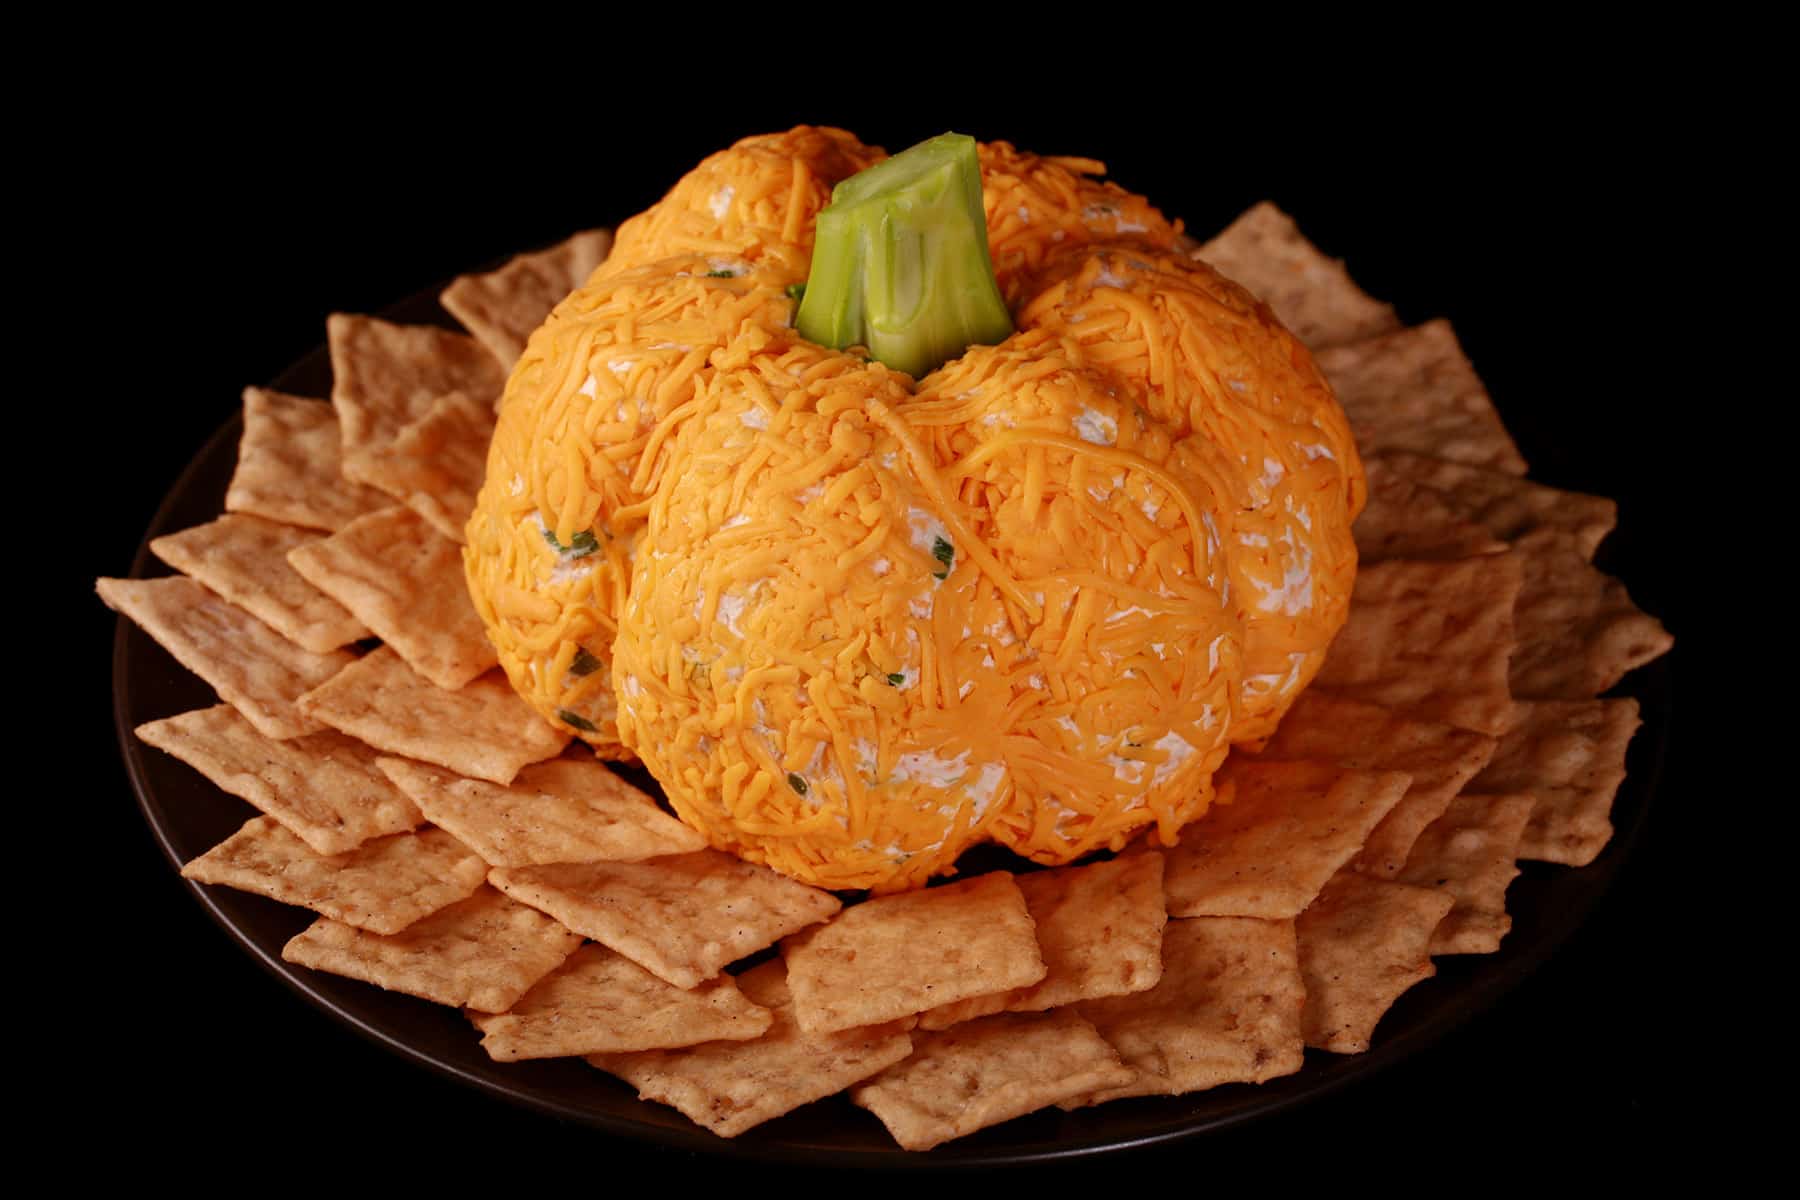 A Thanksgiving cheese ball on a plate with crackers.